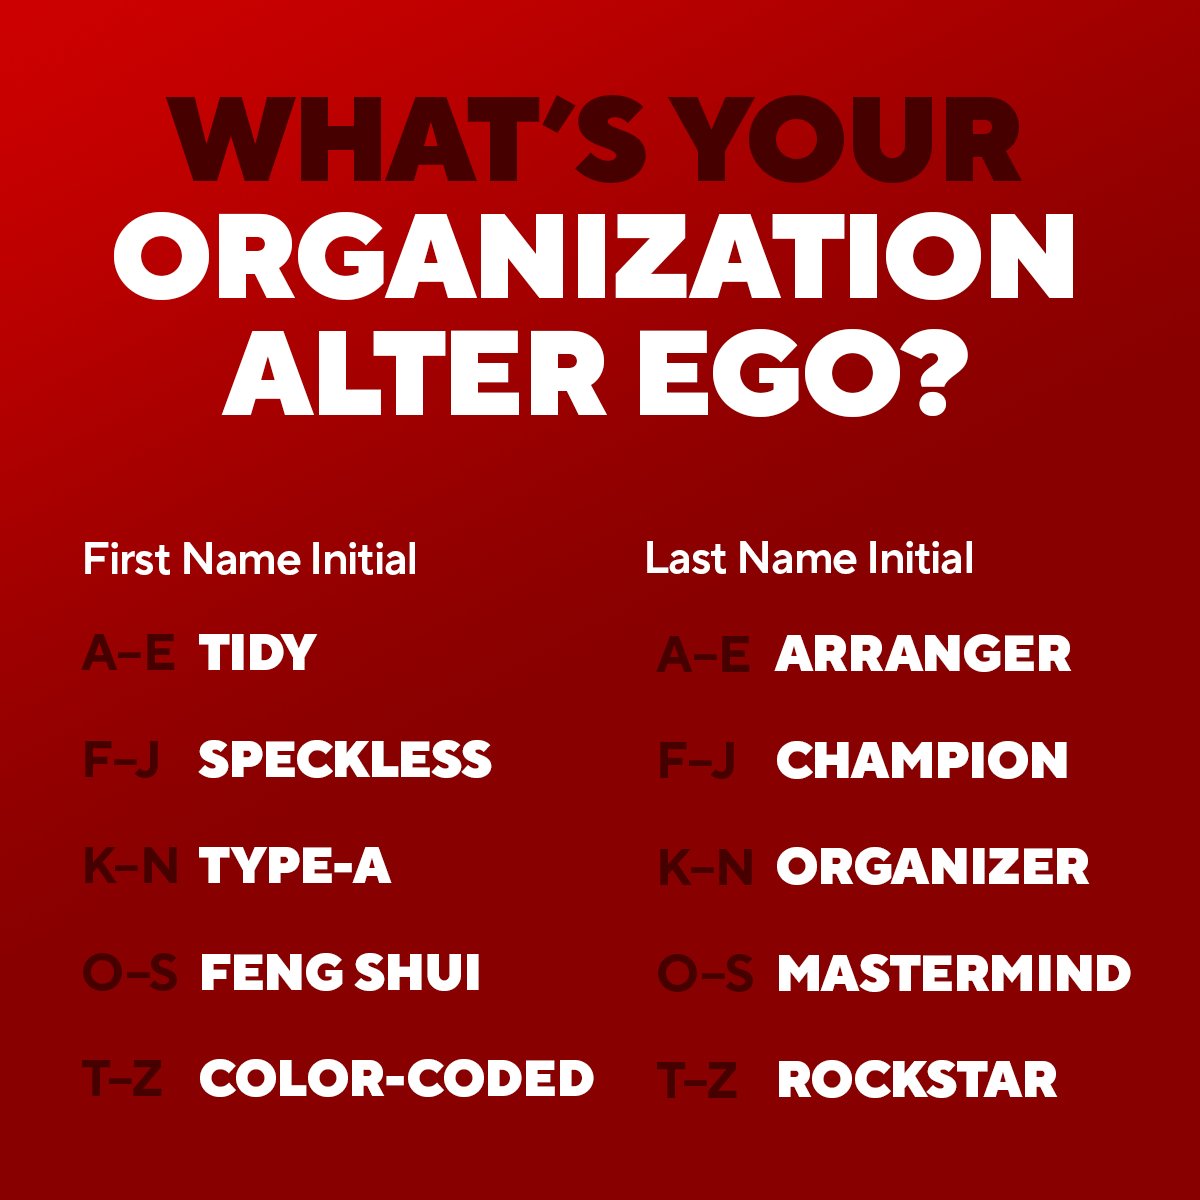 Comment your alter ego name below, then unleash it on your workspace! 2024 is the year we all get organized.